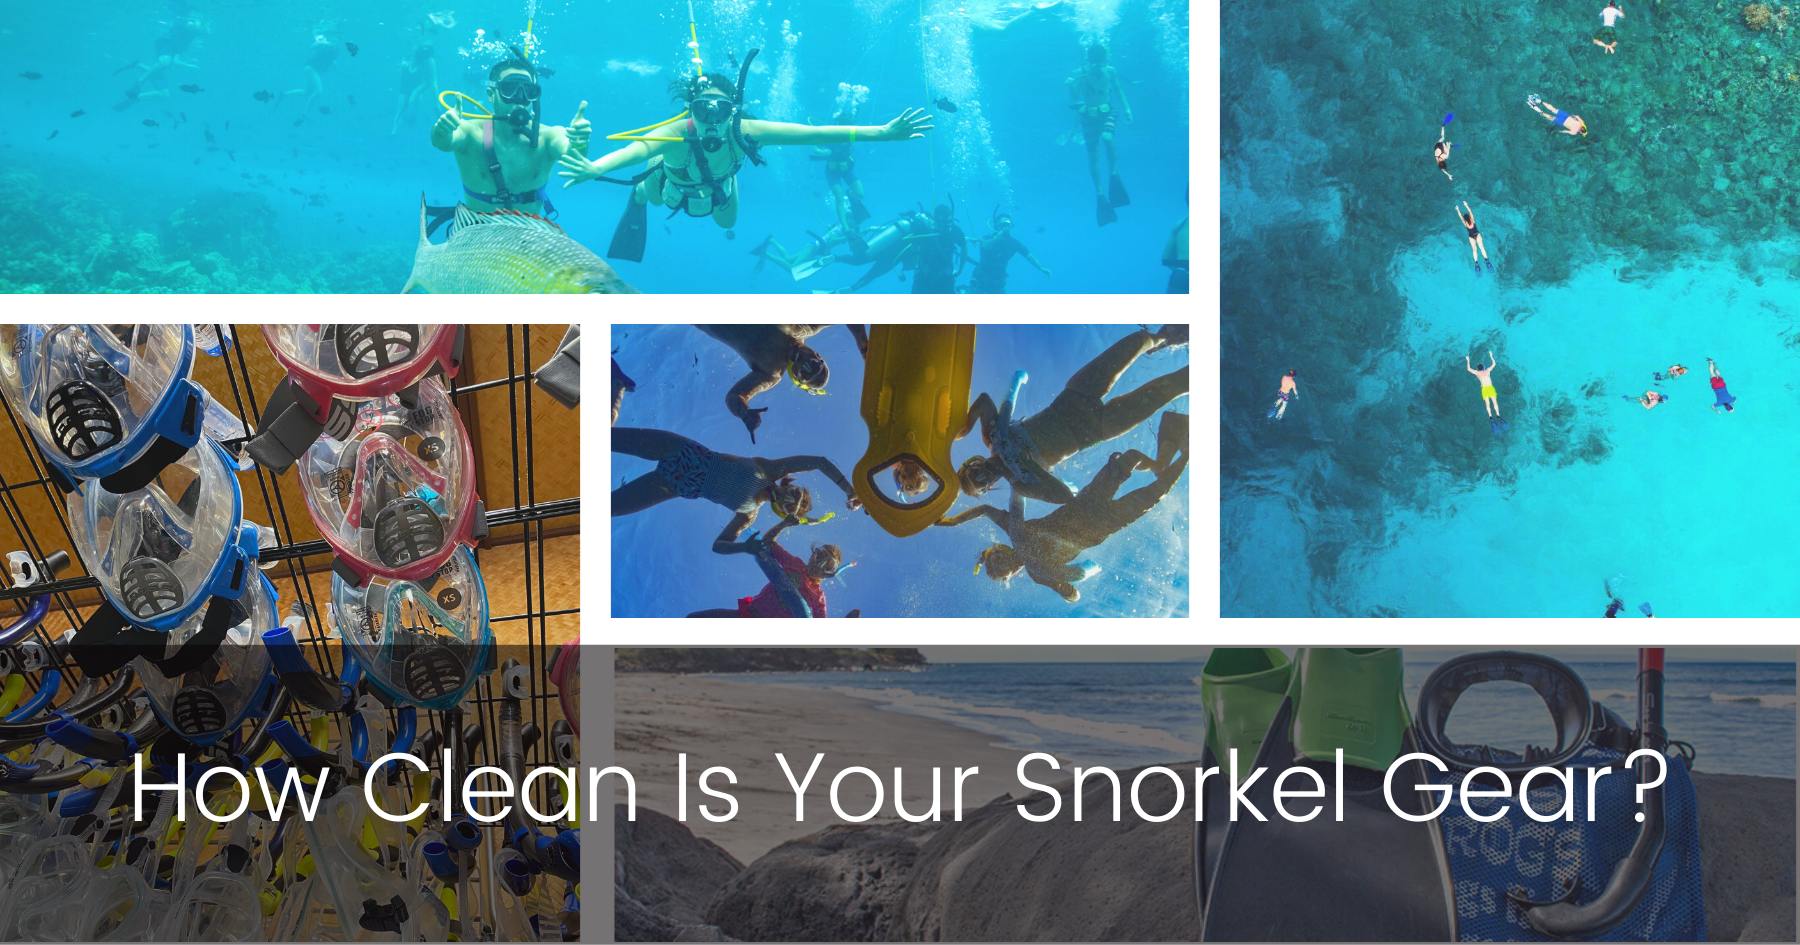 Mask & Snorkel Sanitization - How Clean is your Snorkel Gear?